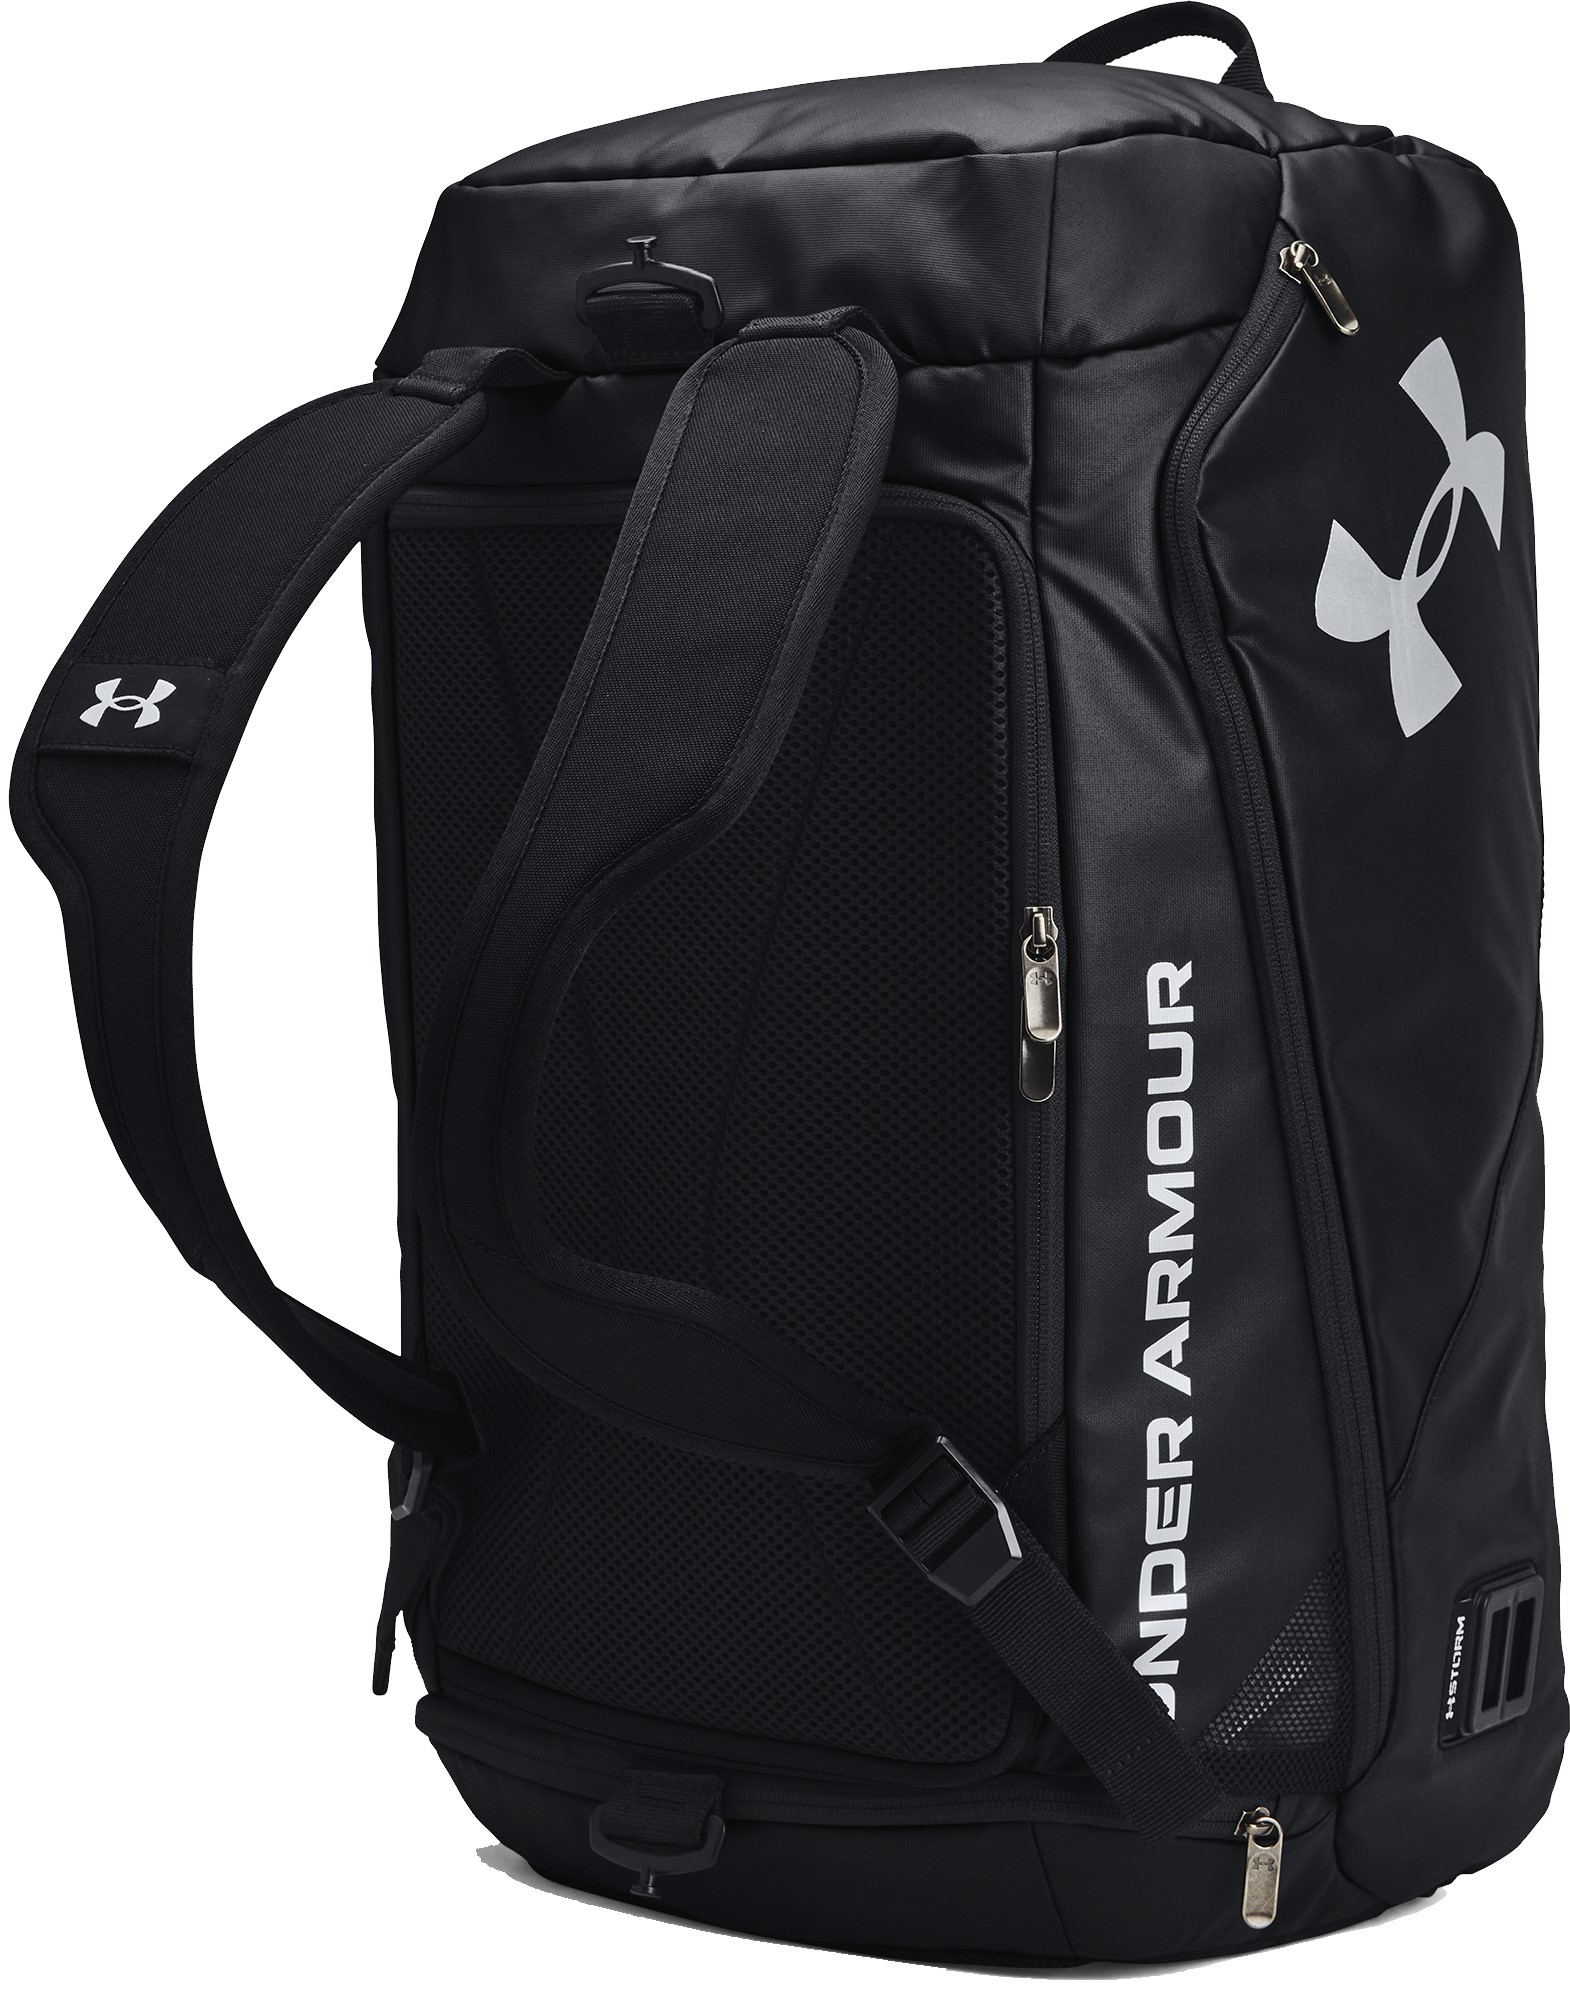 Backpack Under UA Contain Duo Duffle Top4Running.com